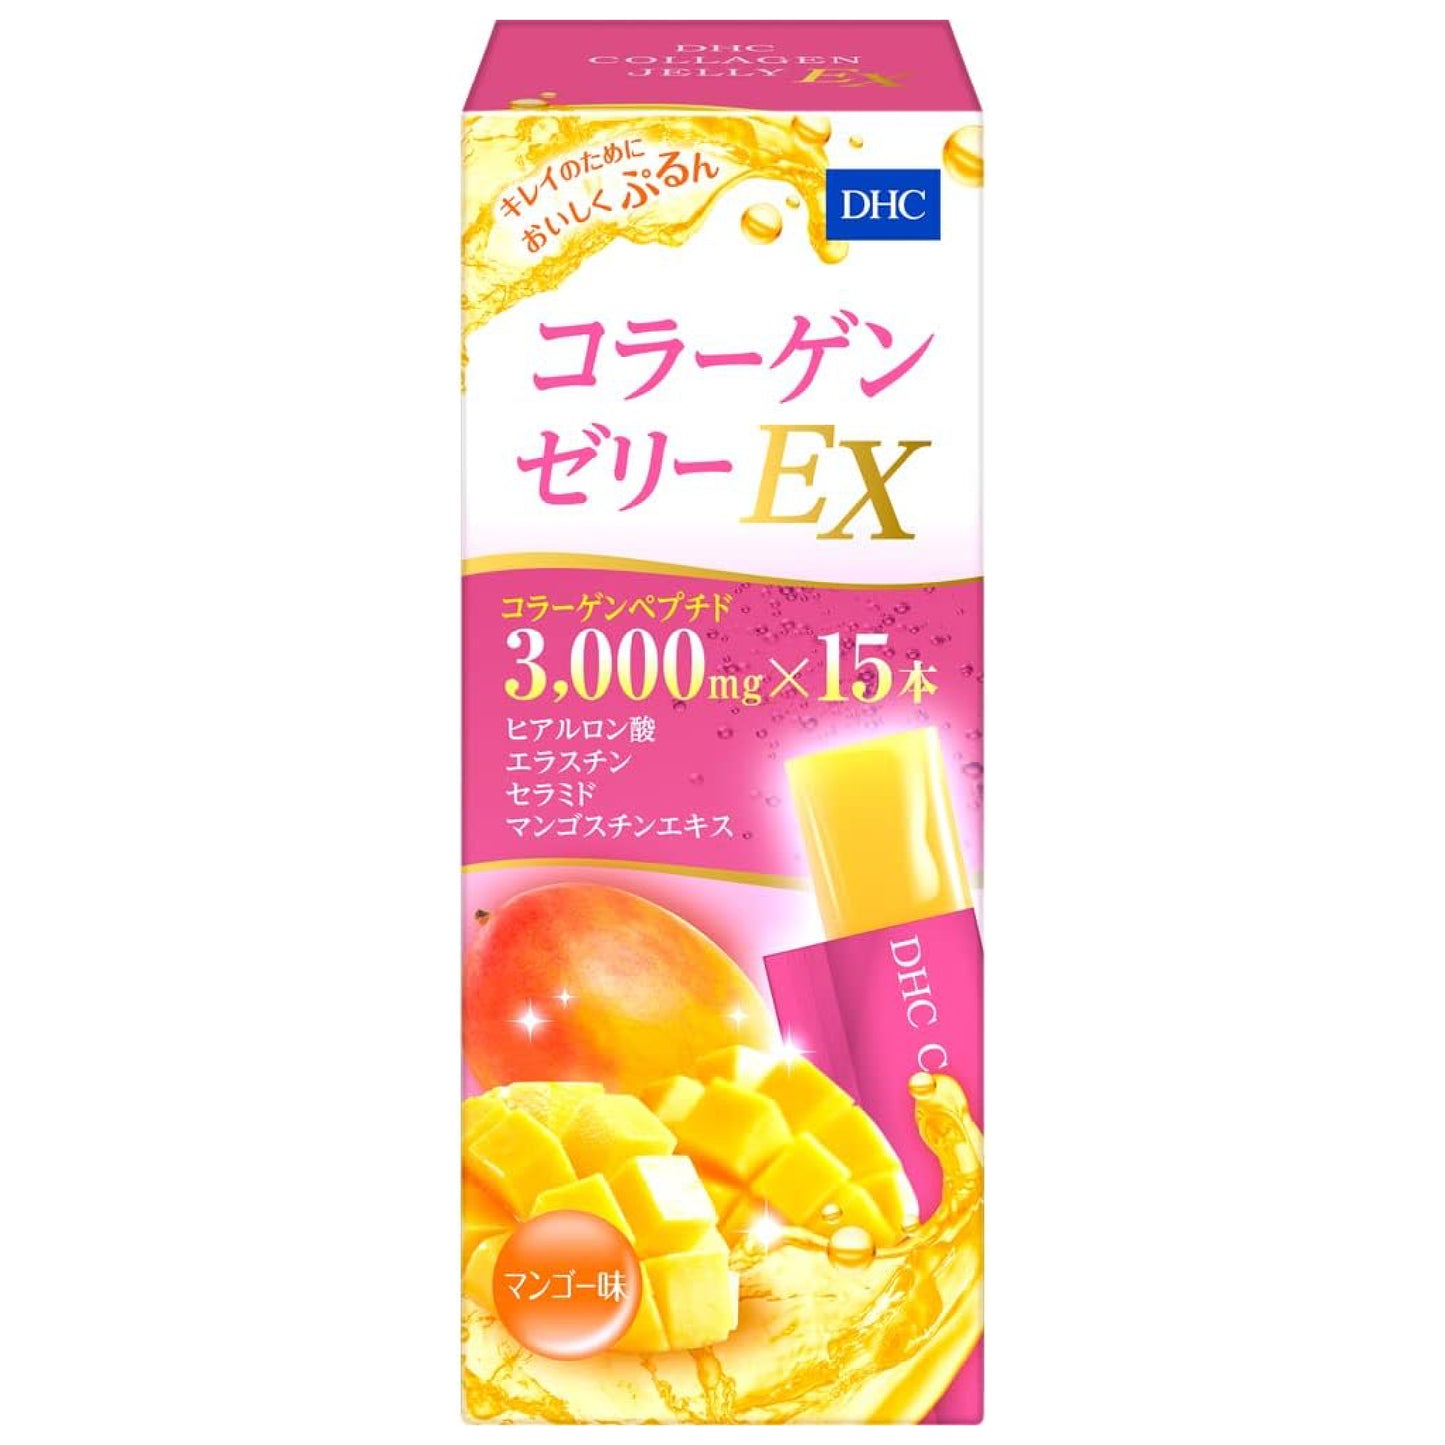 DHC：Collagen Jelly EX Mango Flavor, Pack of 15